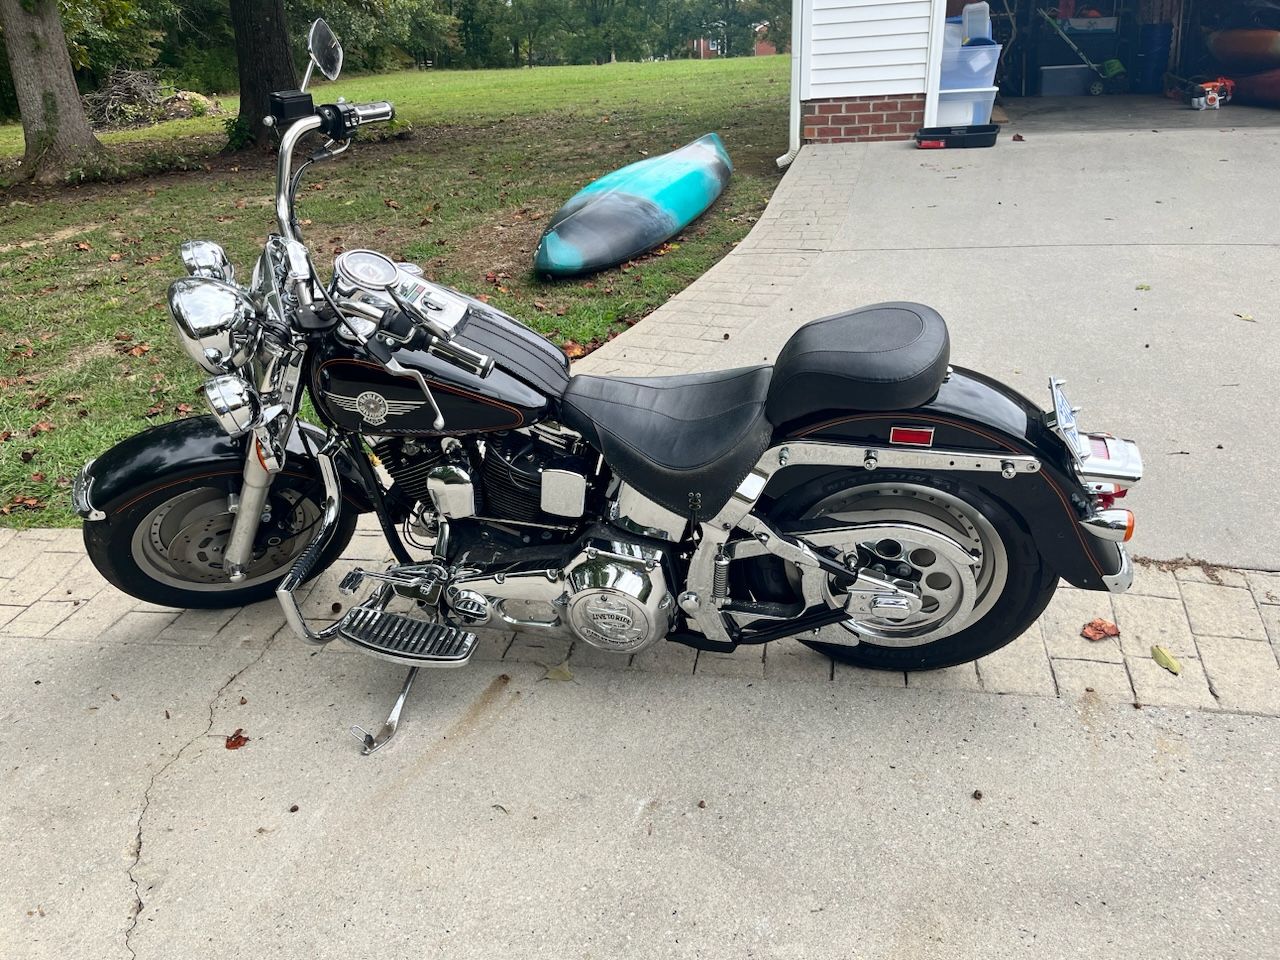 1995 Harley Davidson Fatboy "EXTREMELY LOW MILES”